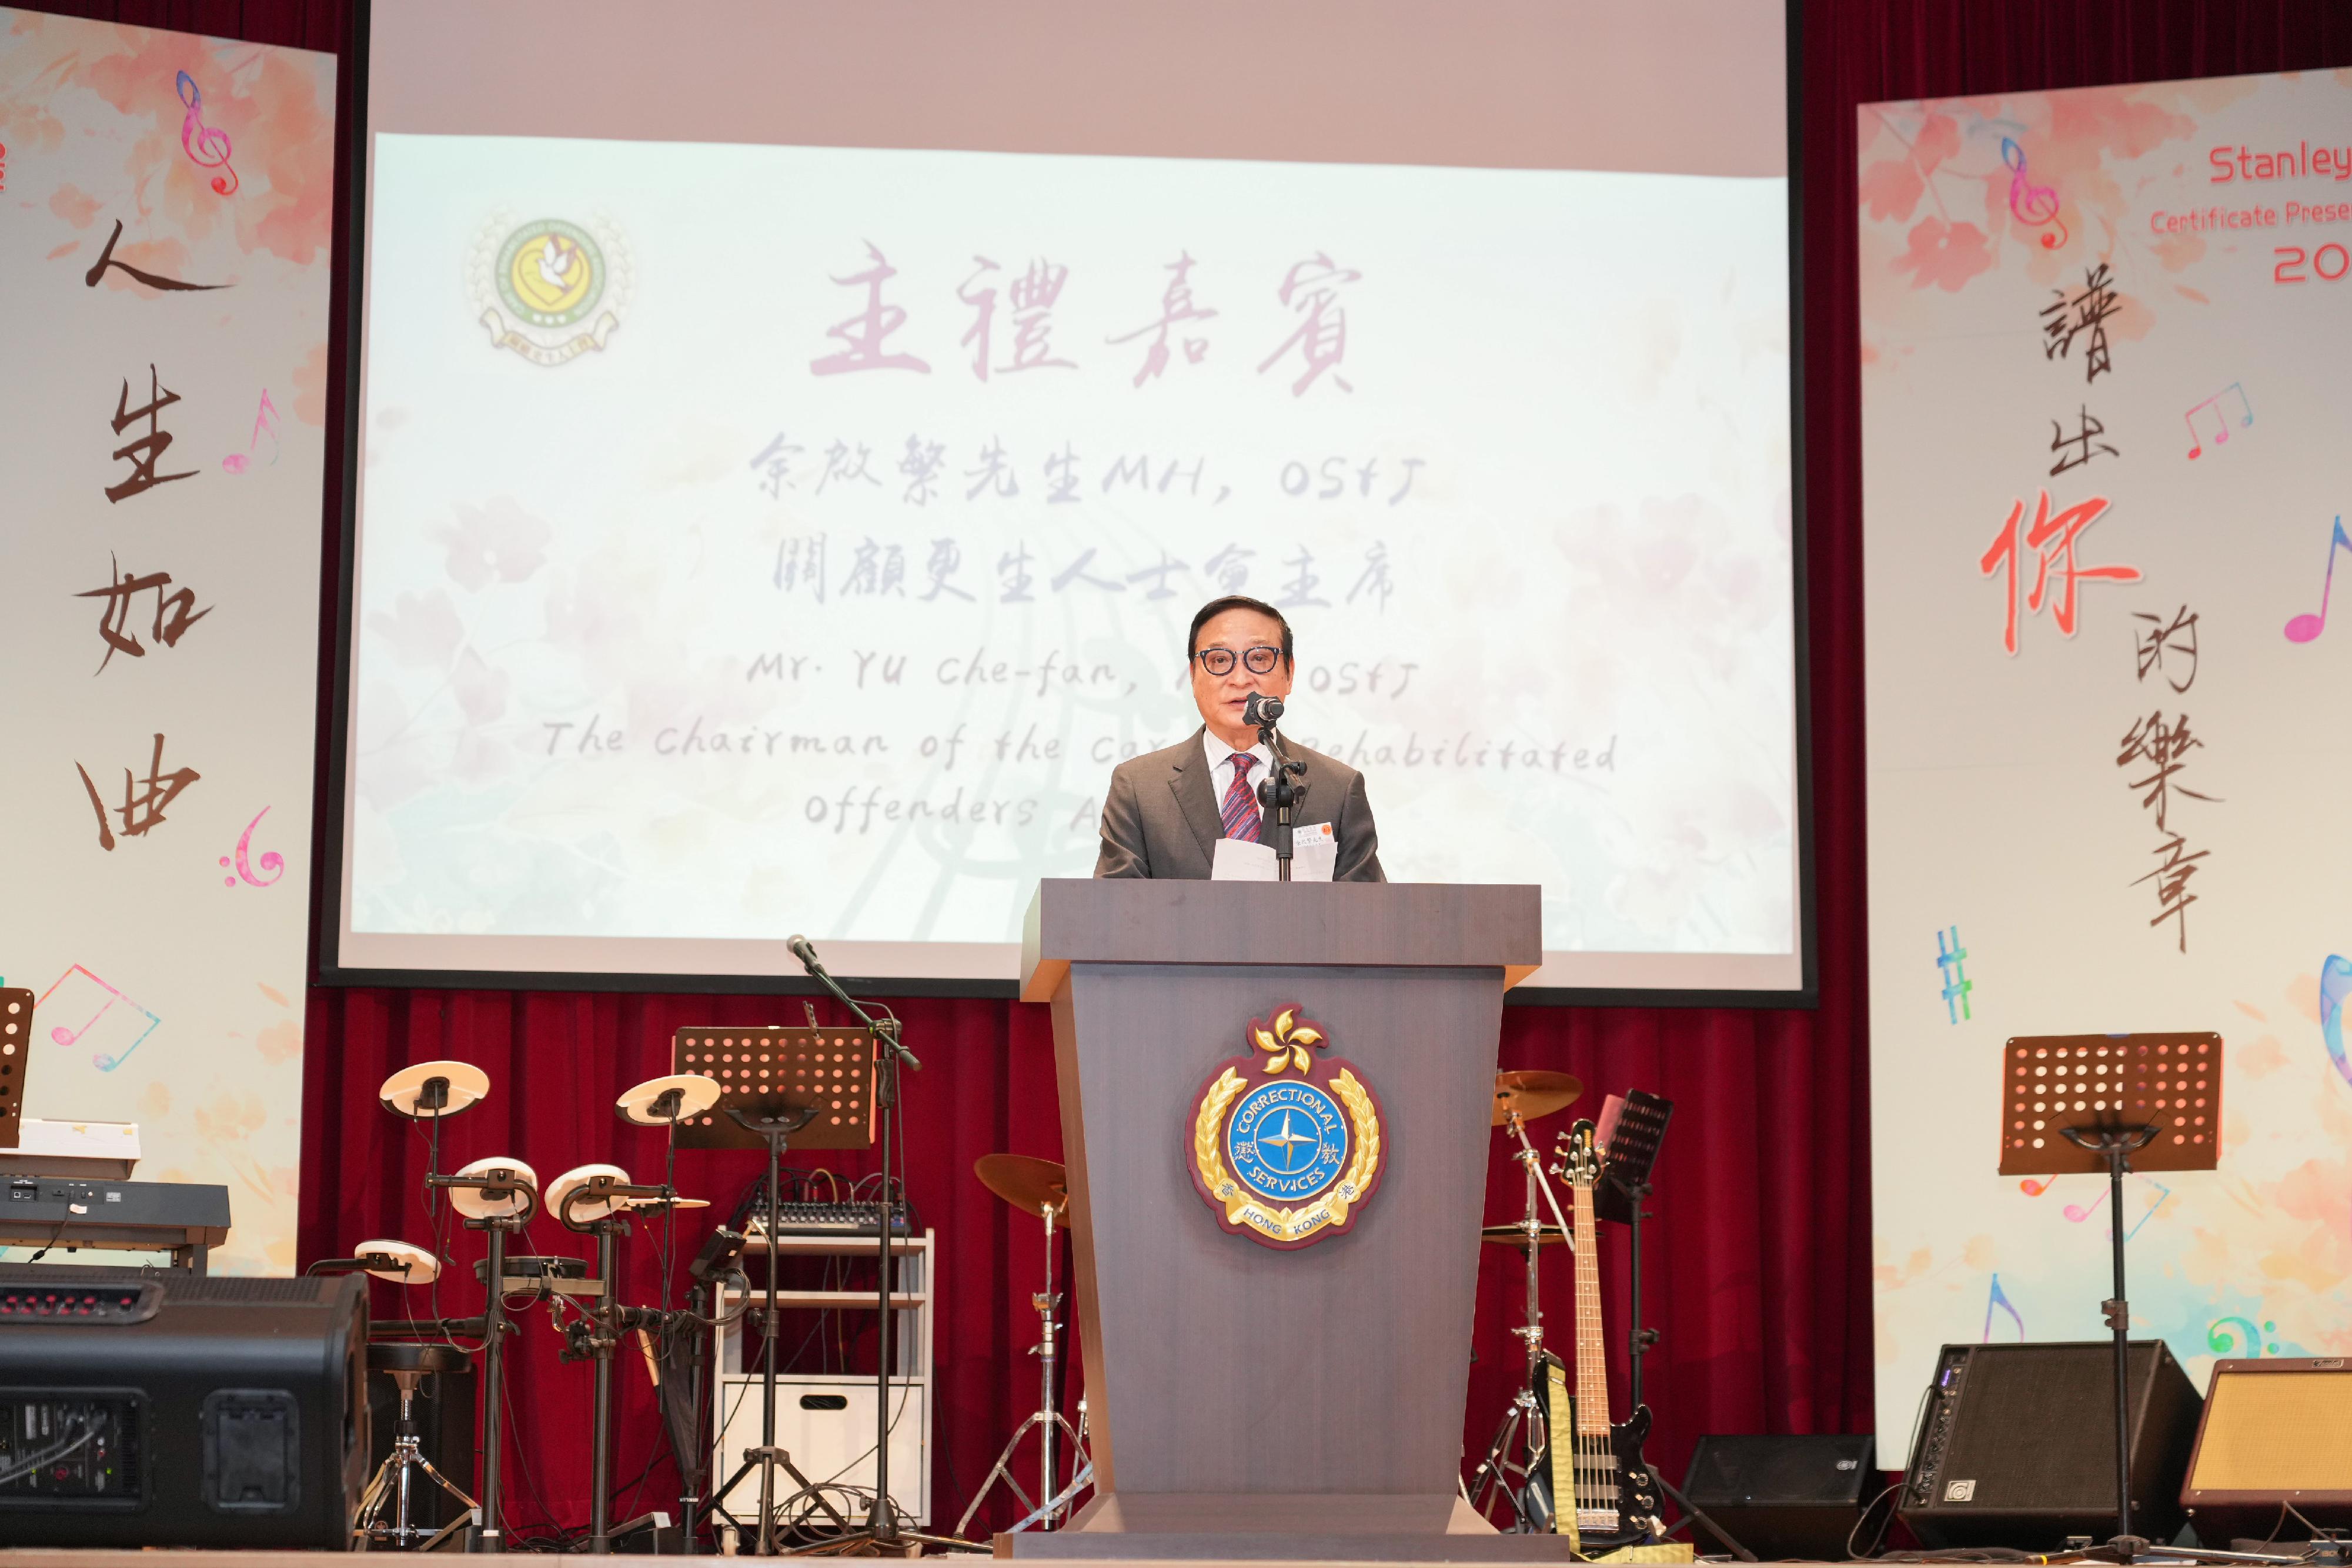 Persons in custody at Stanley Prison of the Correctional Services Department were presented with certificates at a ceremony today (January 31) in recognition of their continuous efforts in pursuing further studies. Photo shows the Chairman of the Care of Rehabilitated Offenders Association, Mr Yu Che-fan, giving a speech at the ceremony.